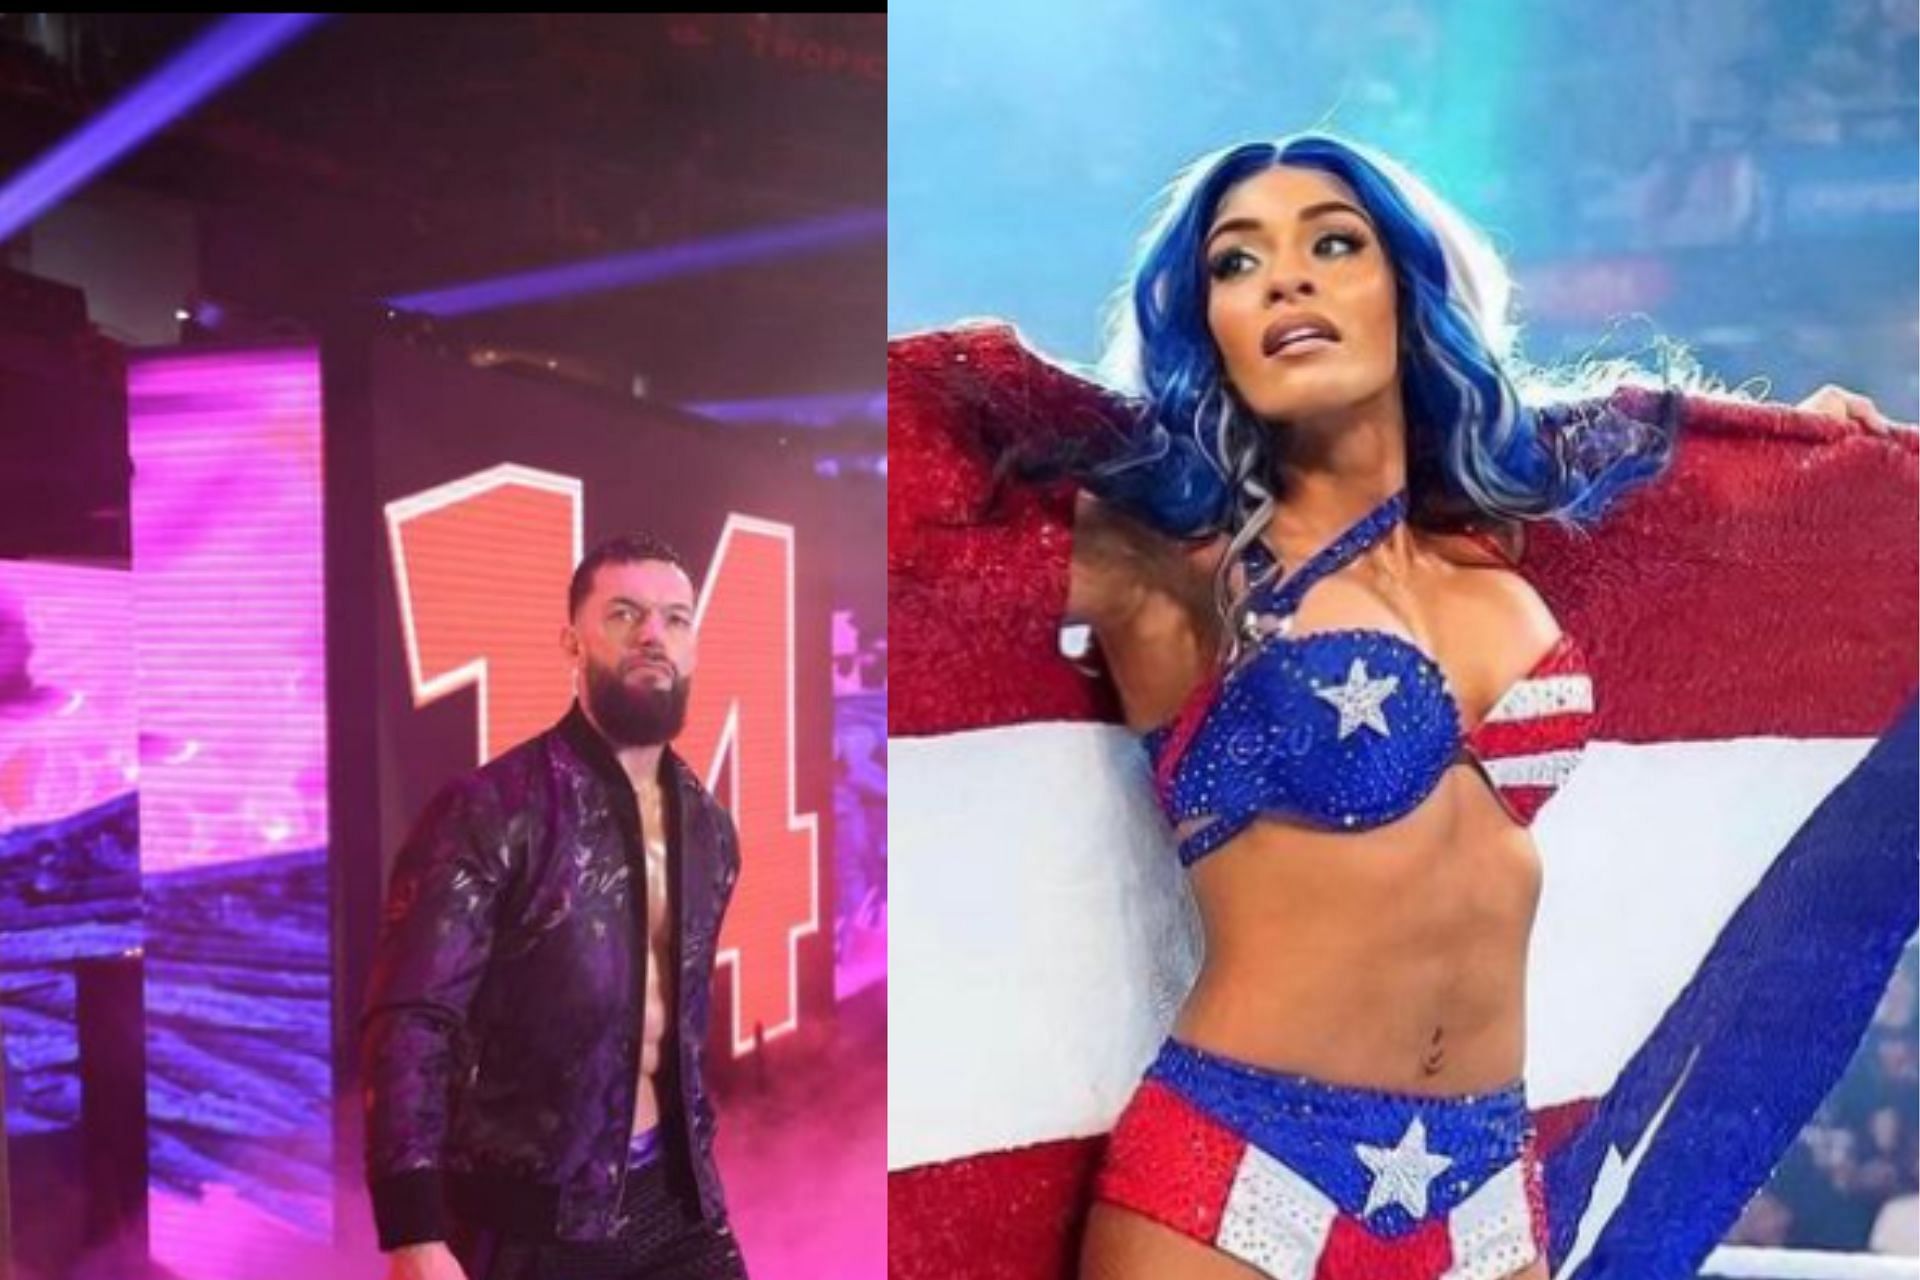 Tony Khan might need to sign up more wrestlers to ensure Malakai Black and Buddy Matthews stay [Image Credits: Finn Balor and Zelina Vega Instagram